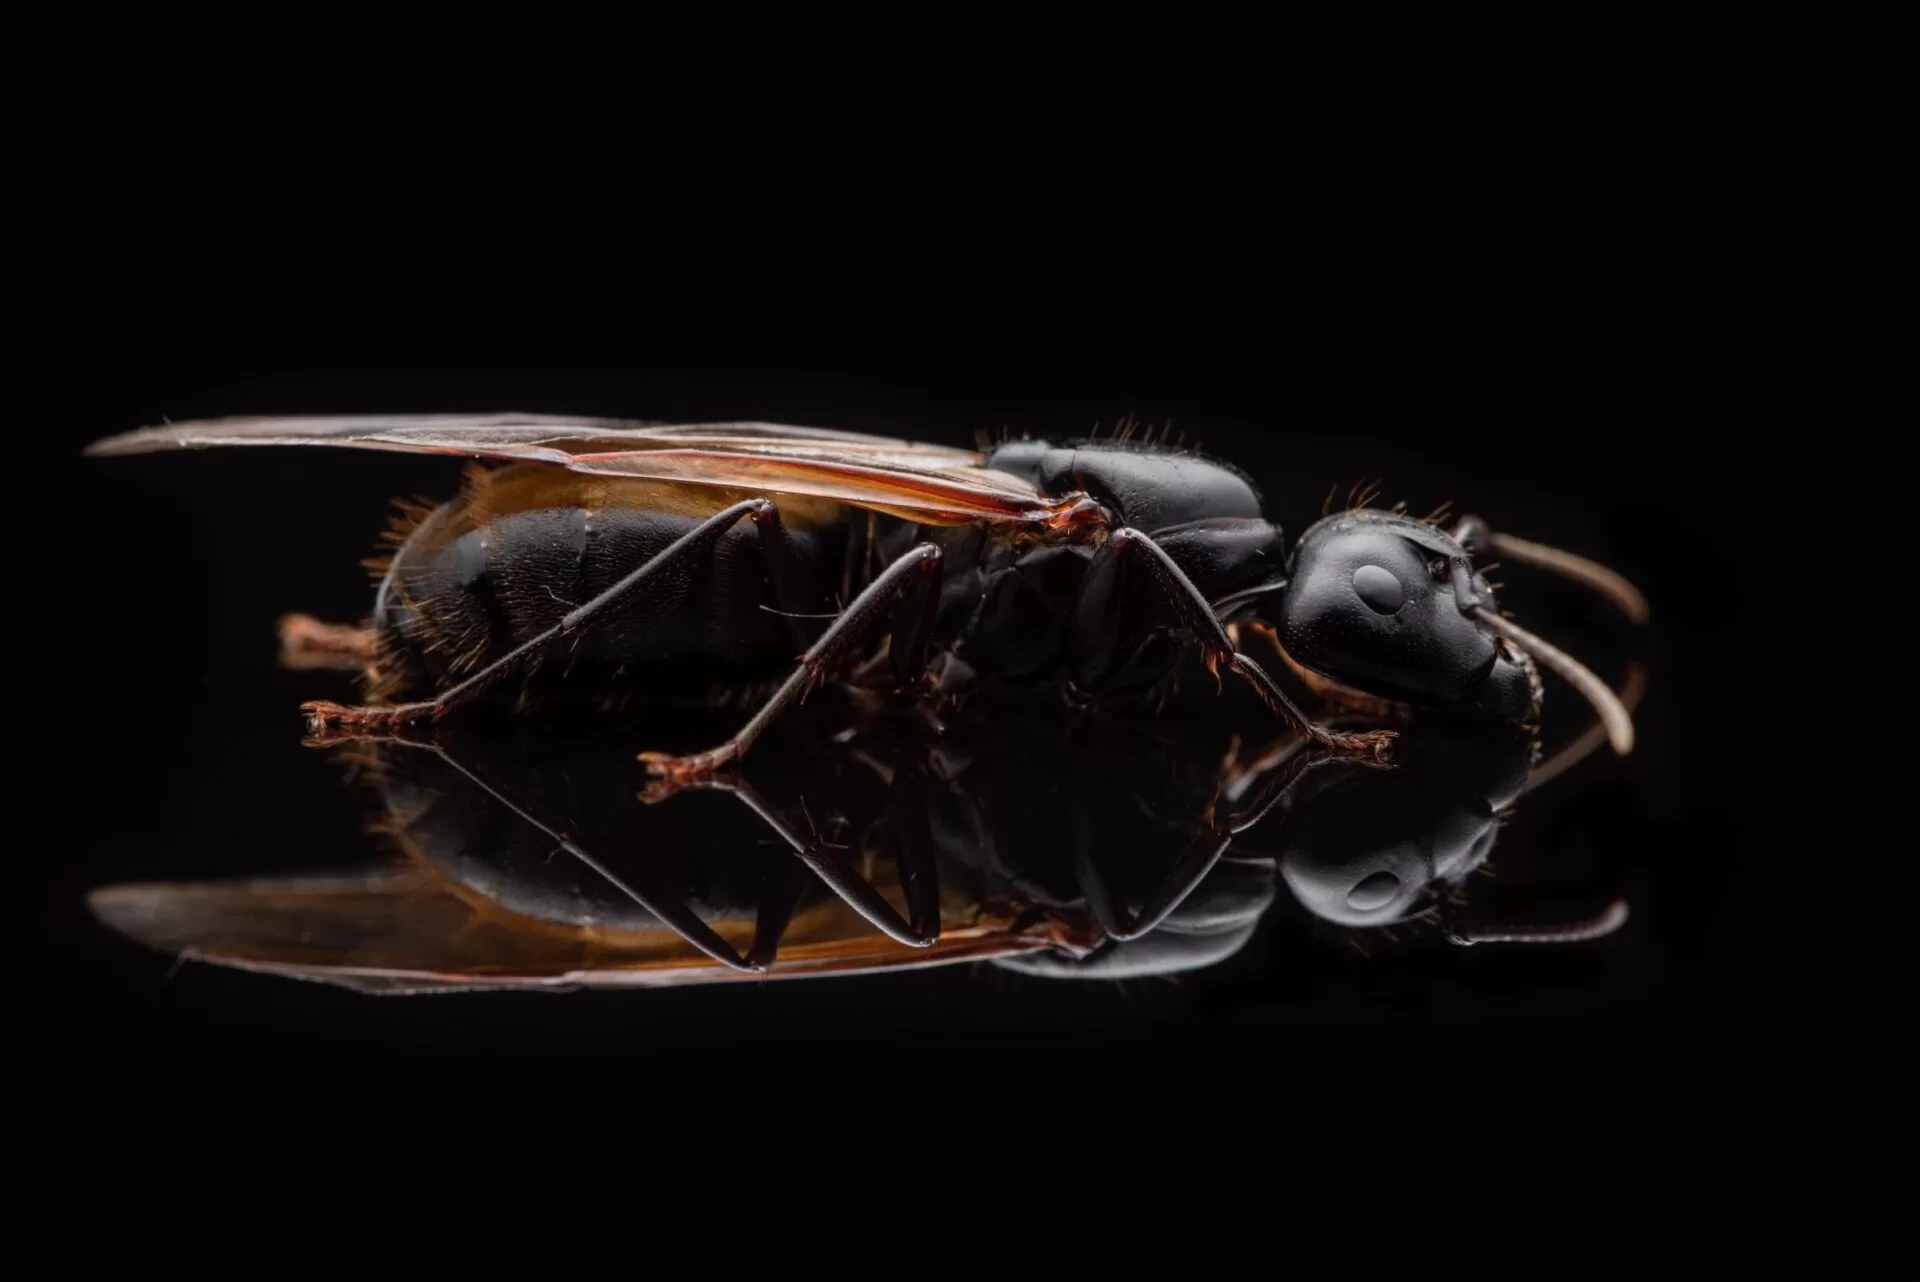 A winged Camponotus pennsylvanicus queen.